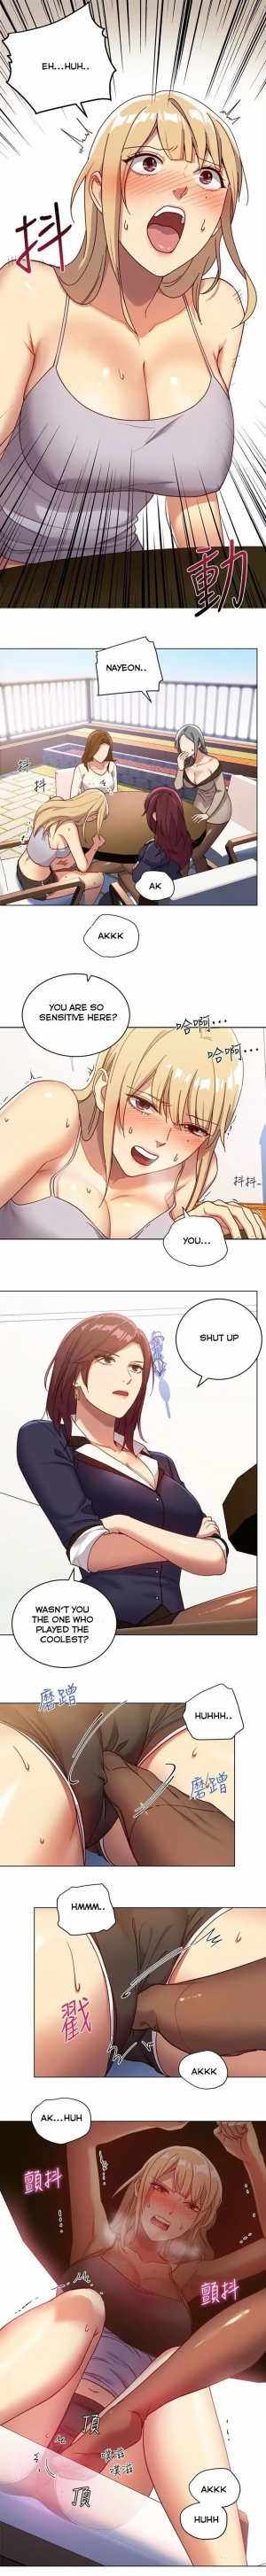  [Neck Pilllow] Stepmother Friends Ch.39/? [English] [Hentai Universe] NEW! 13/10/2020  - Page 52